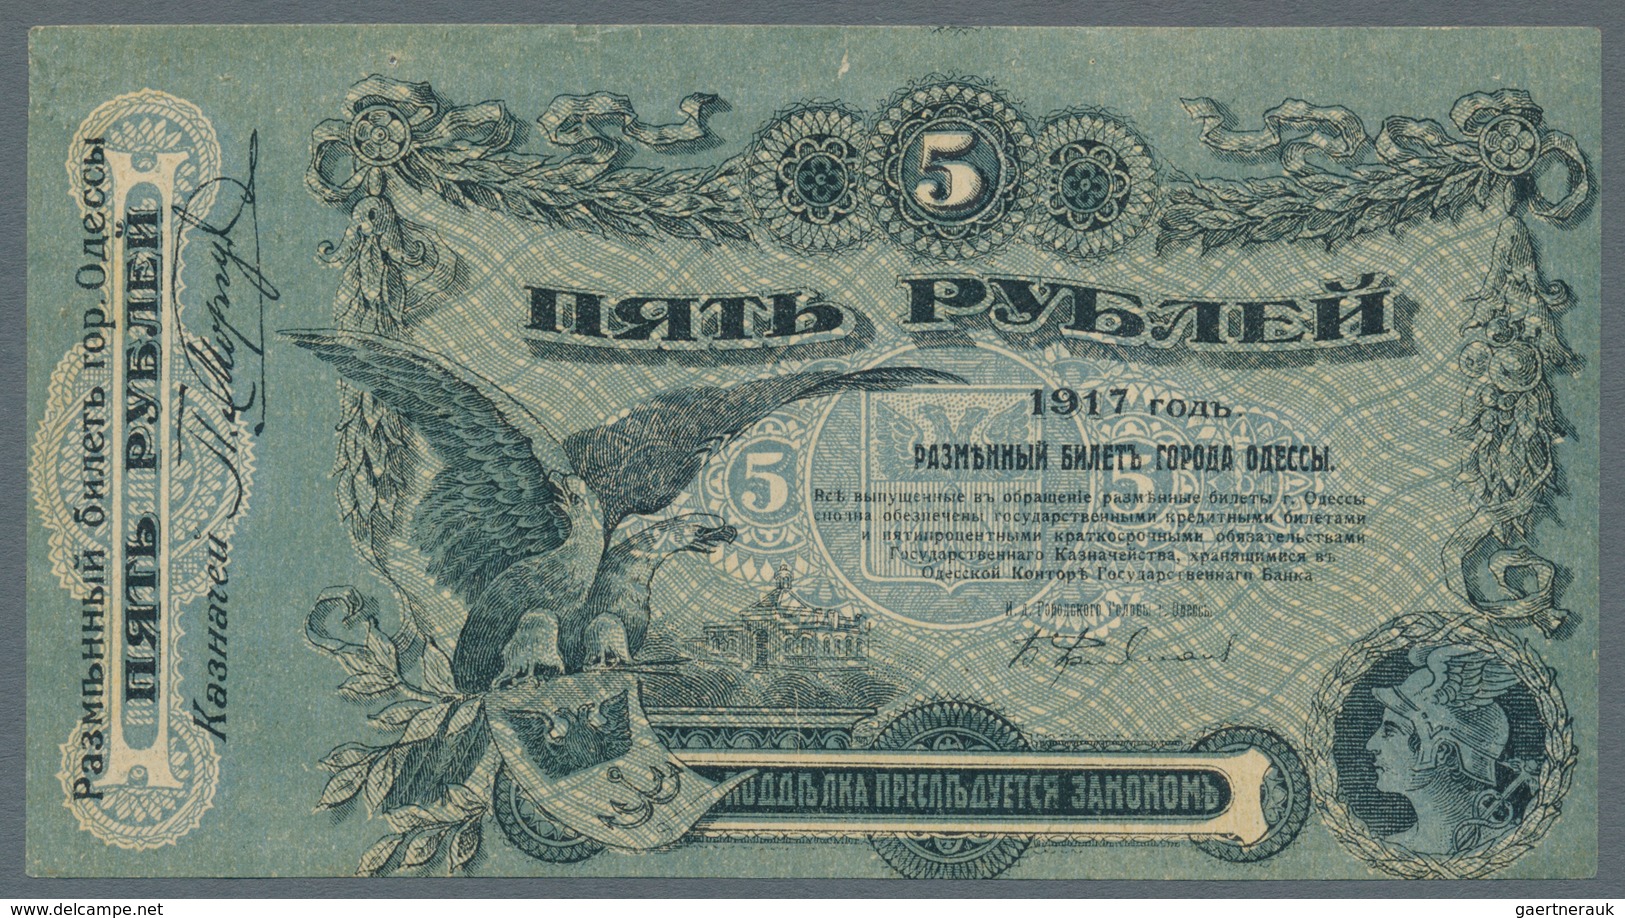 Russia / Russland: South Russia and Rostov on Don set with 13 Banknotes comprising for example Odess